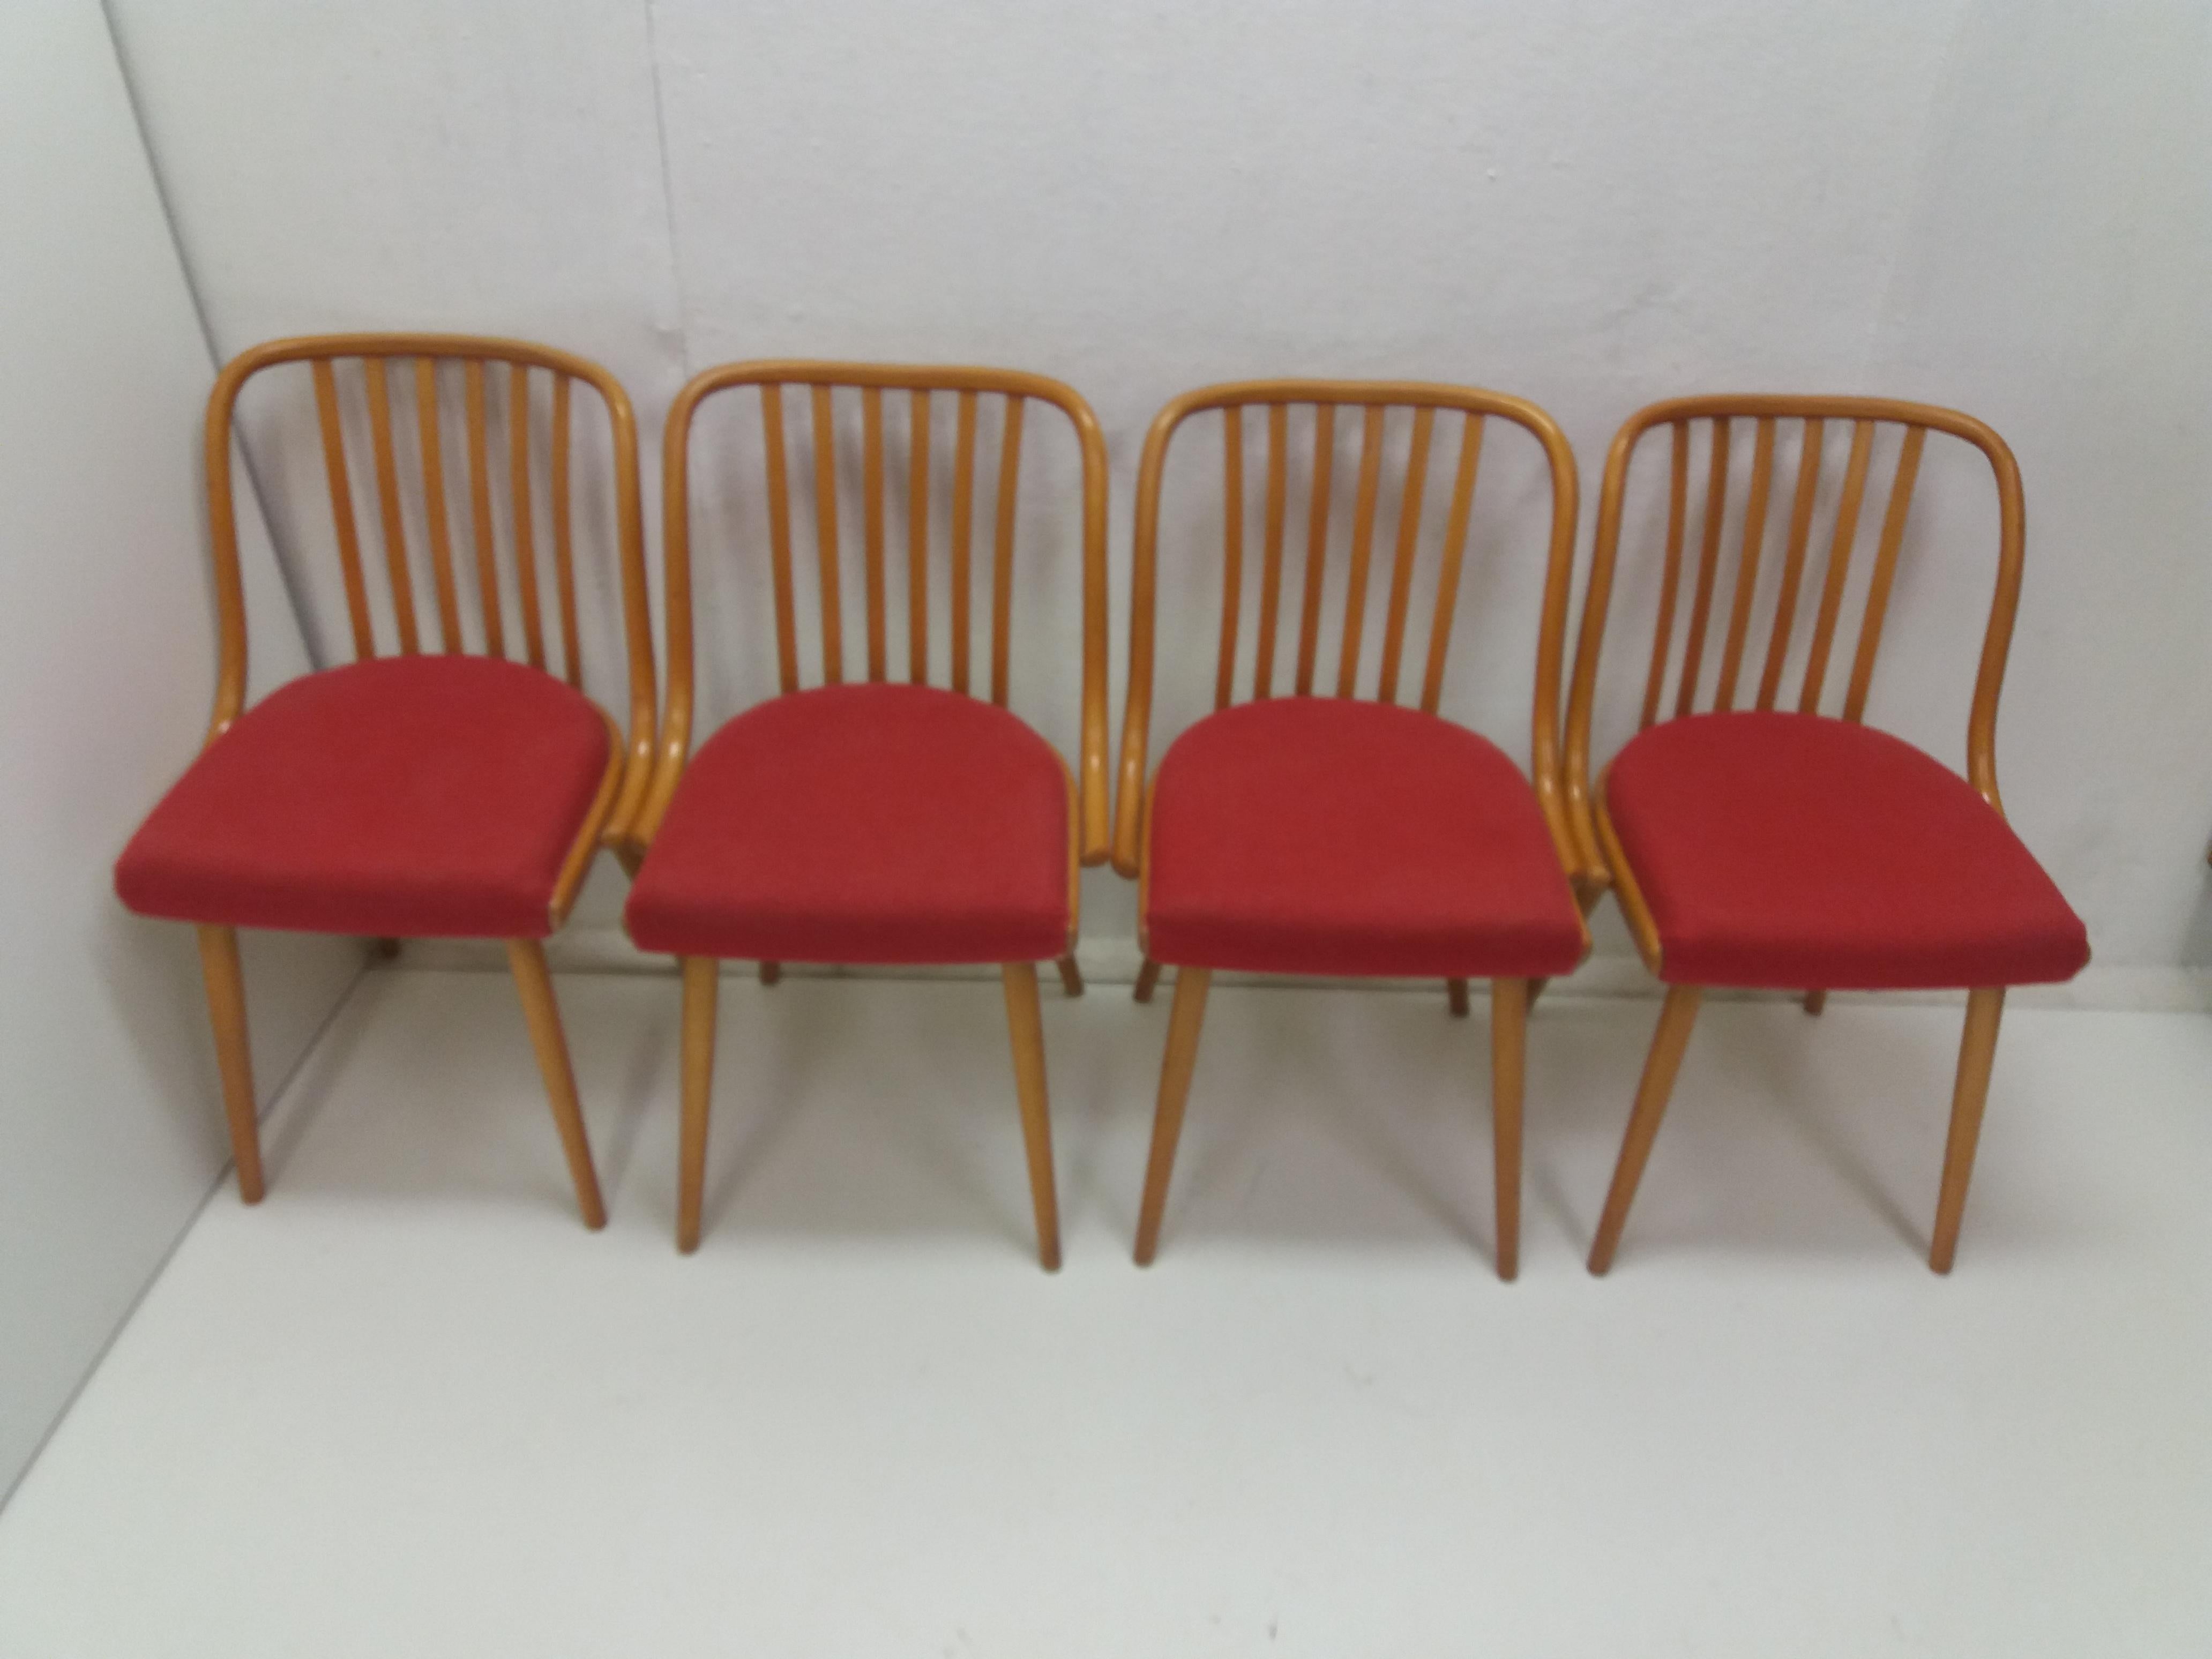 1960 Set of 4 Retro Suman Chairs and Table, Czechoslovakia For Sale 3